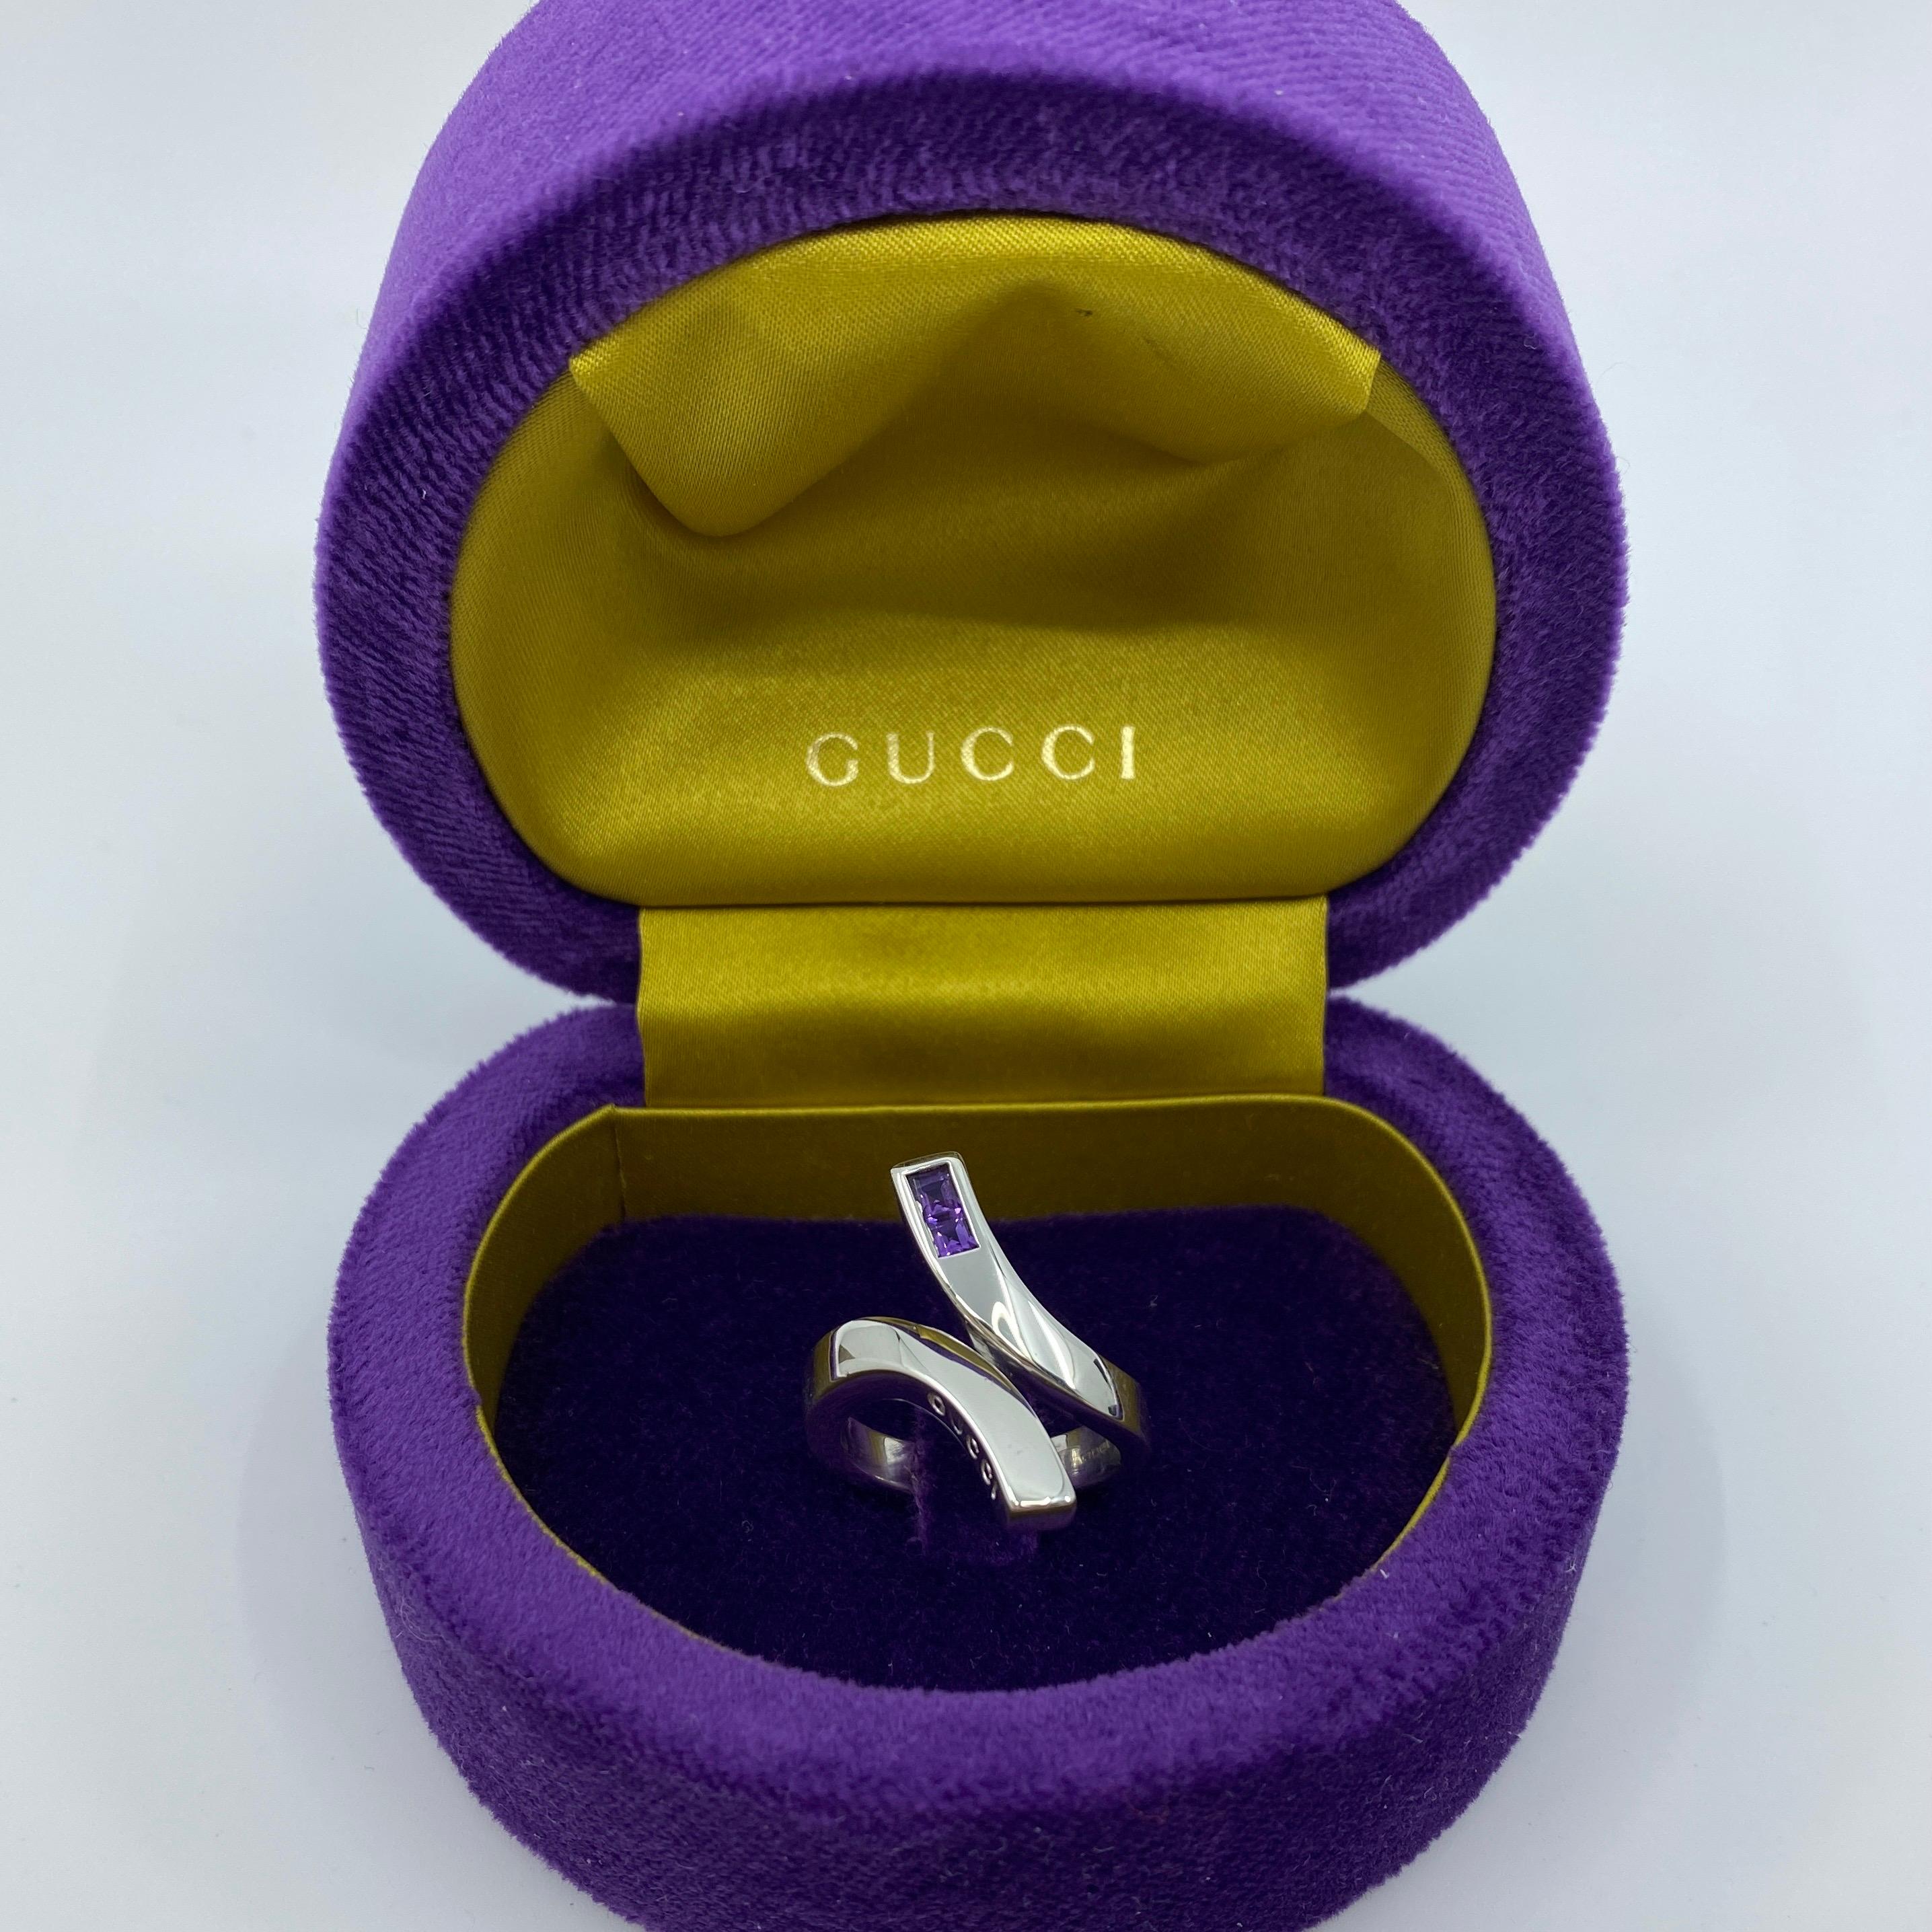 Gucci silver twirl ring set with 2 fine quality princess/square cut amethysts. Comes with original Gucci box.

Used item, some minor scratches on it. Has been professionally cleaned and polished so very bright and shiny. Like new.

Ring size N1/2/